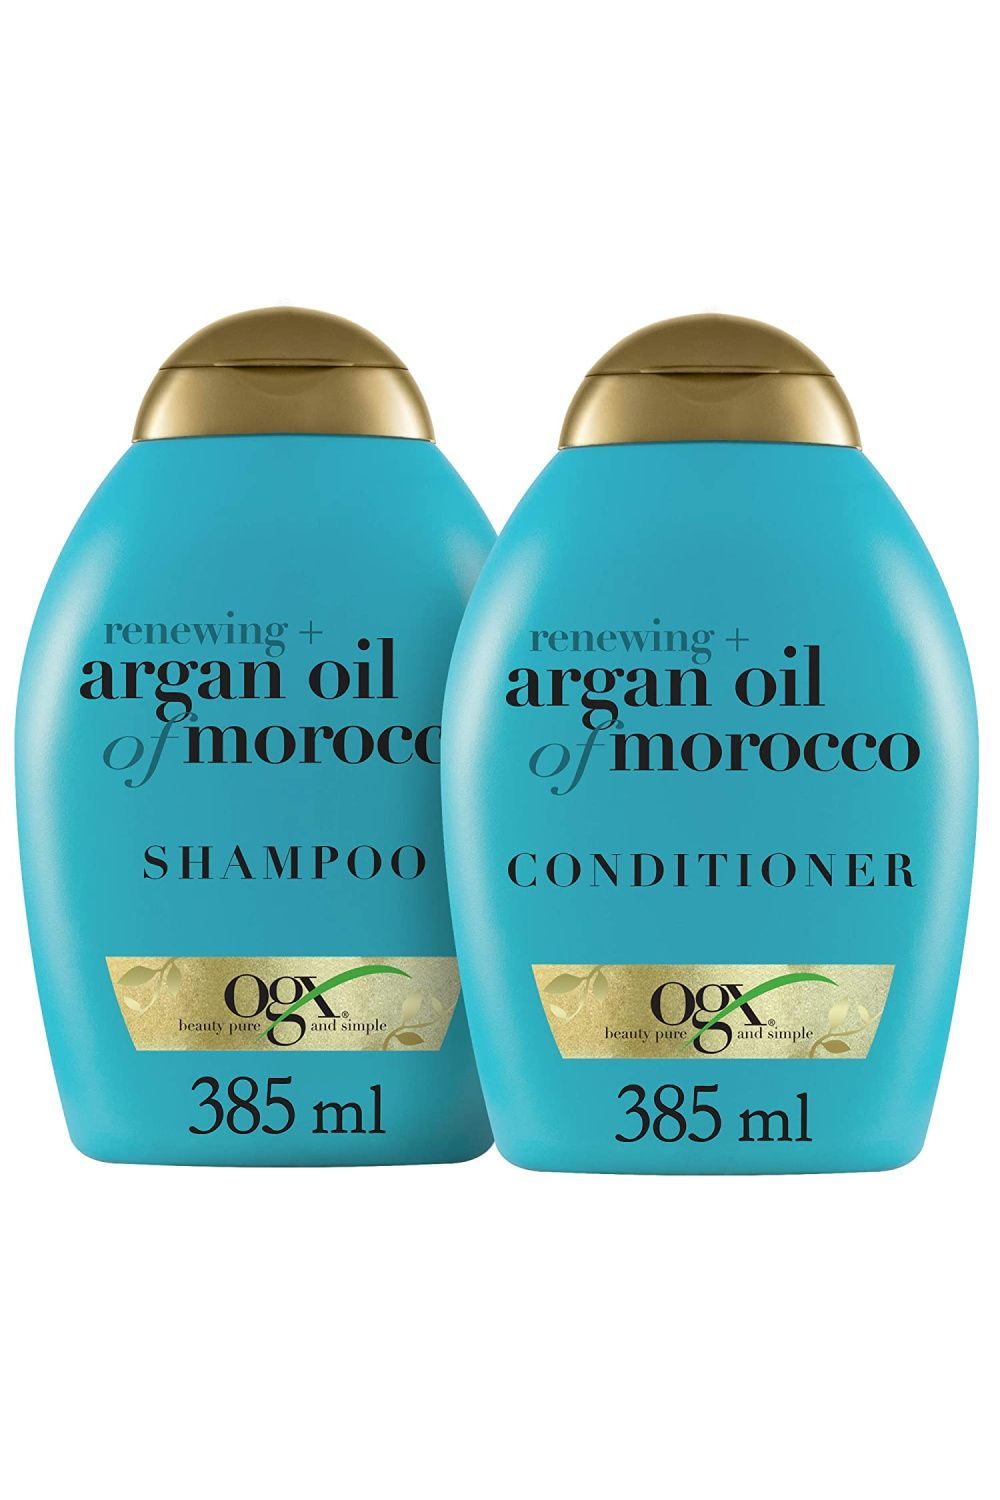 How to Use Argan Oil for Hair in 2022 - 8 Best Argan Oil Products